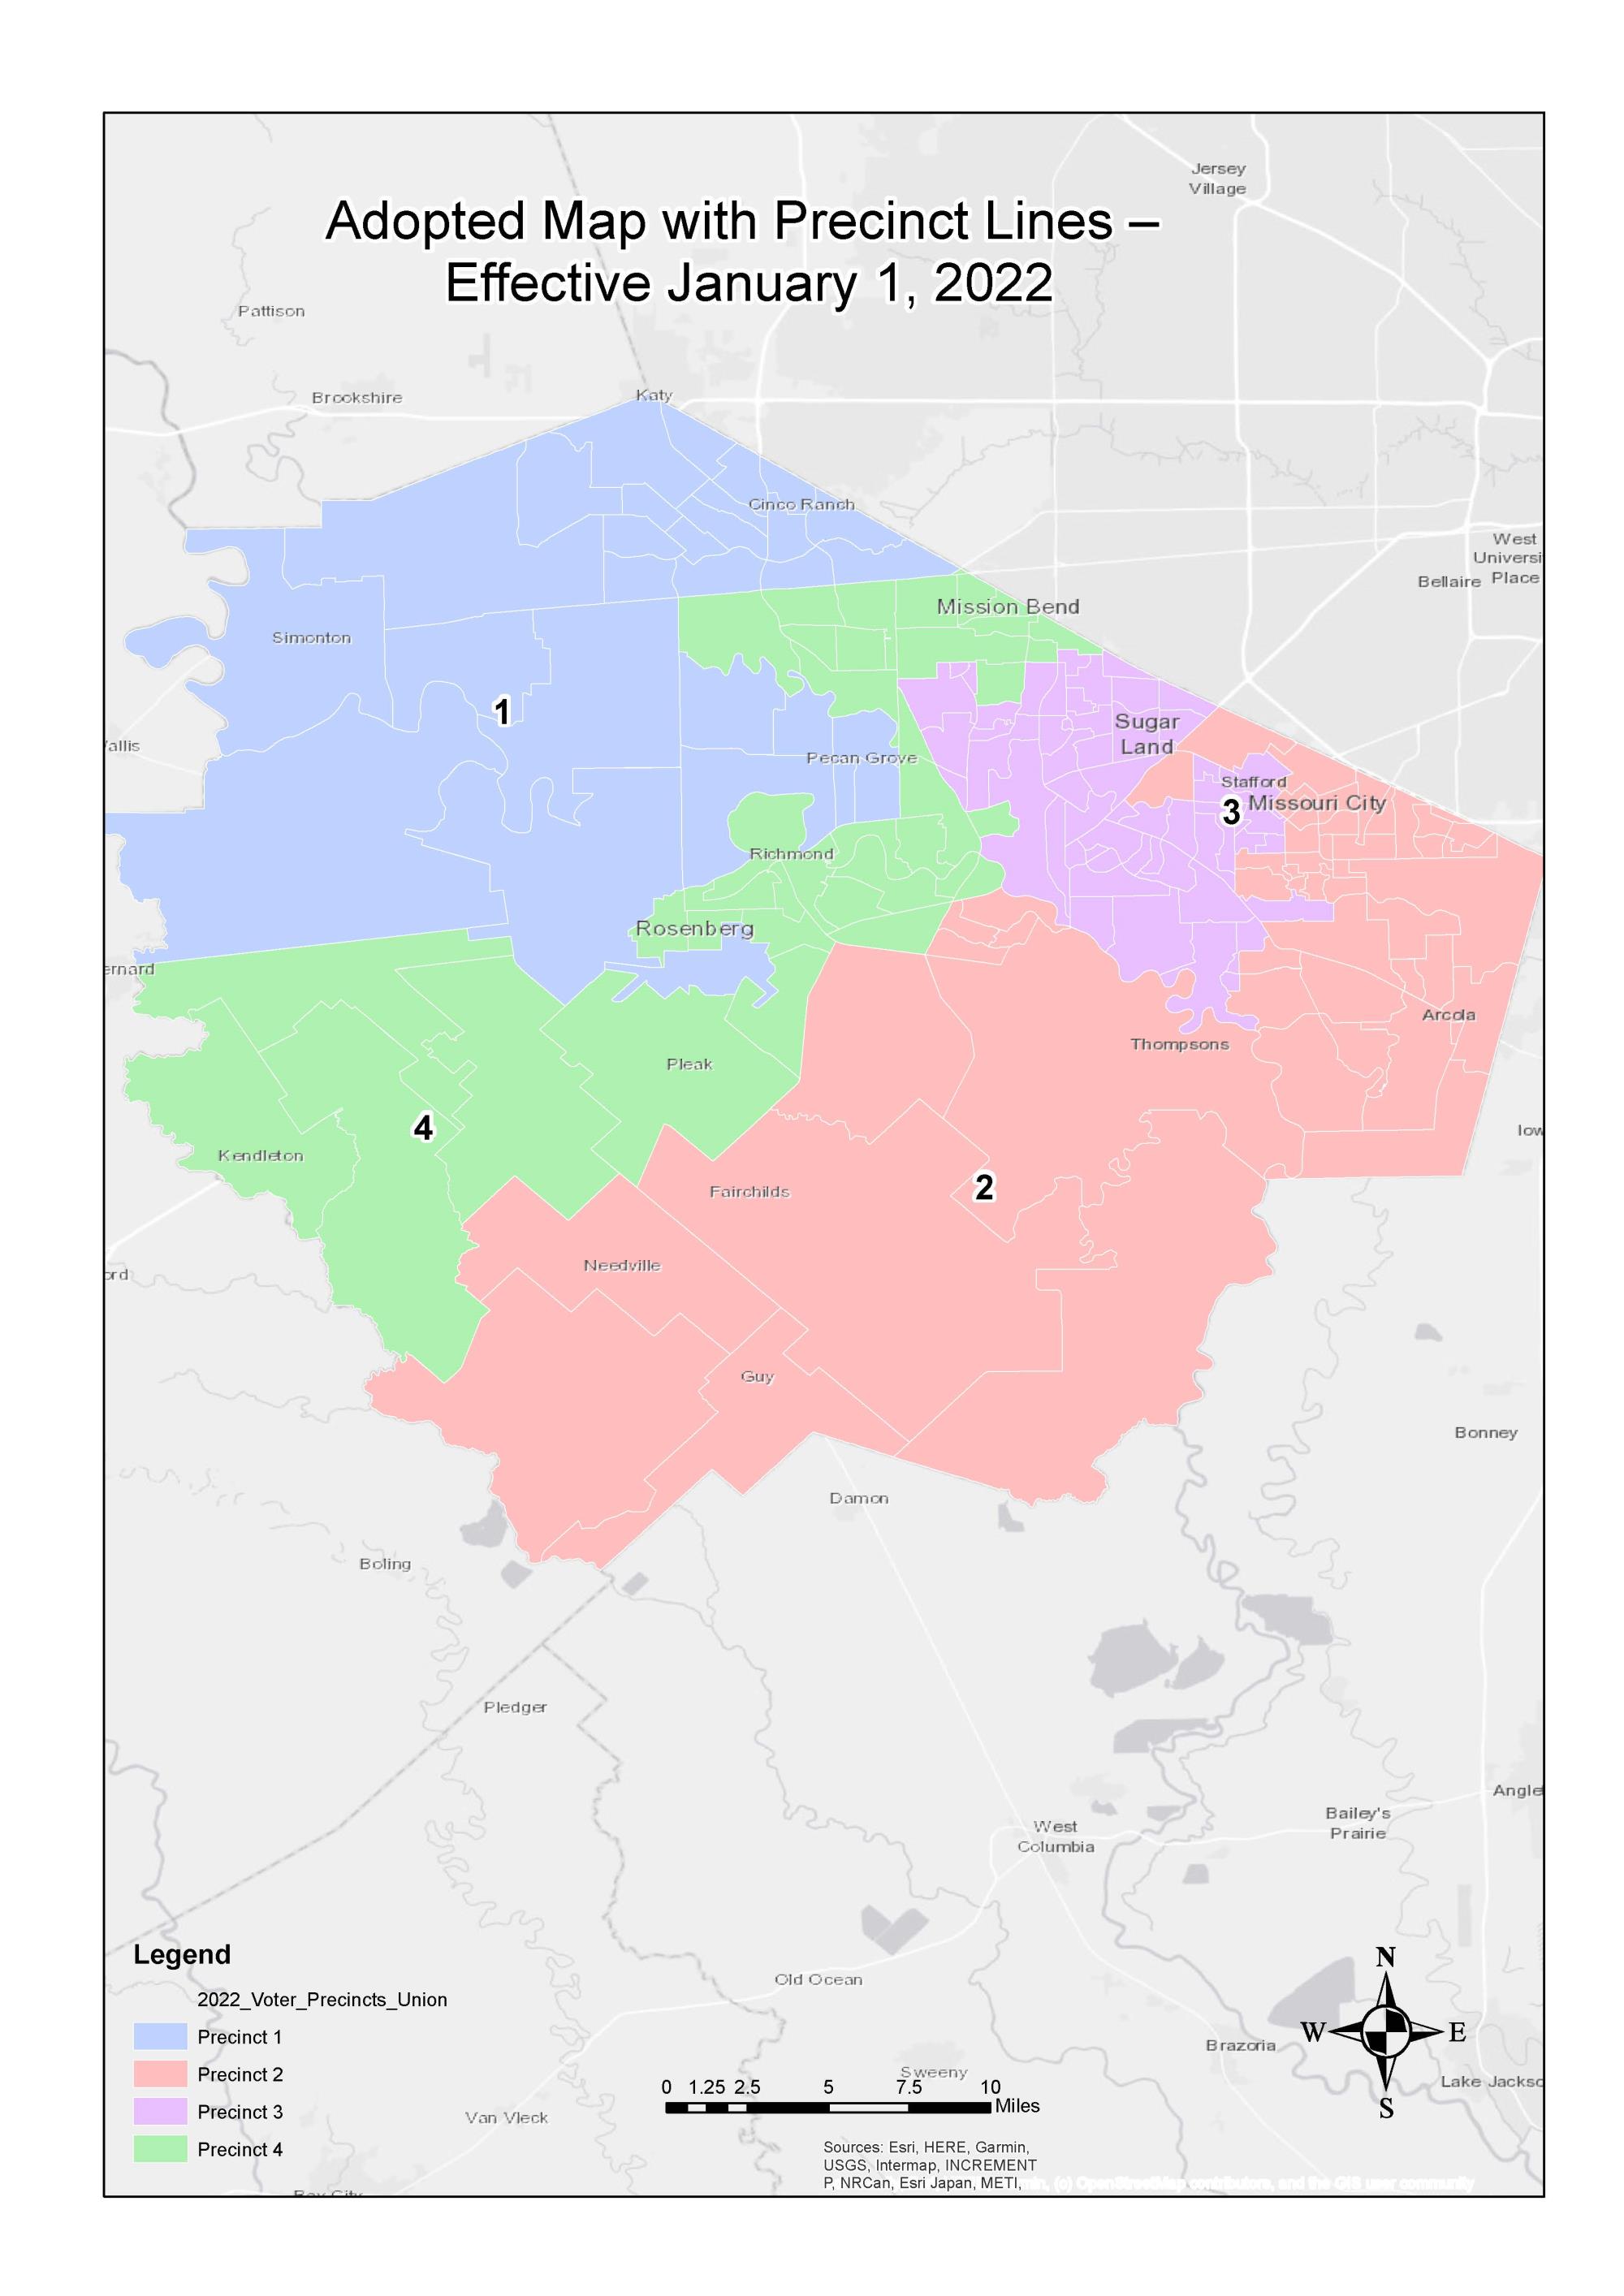 Adopted Map with Precinct Lines Effective January 1, 2022